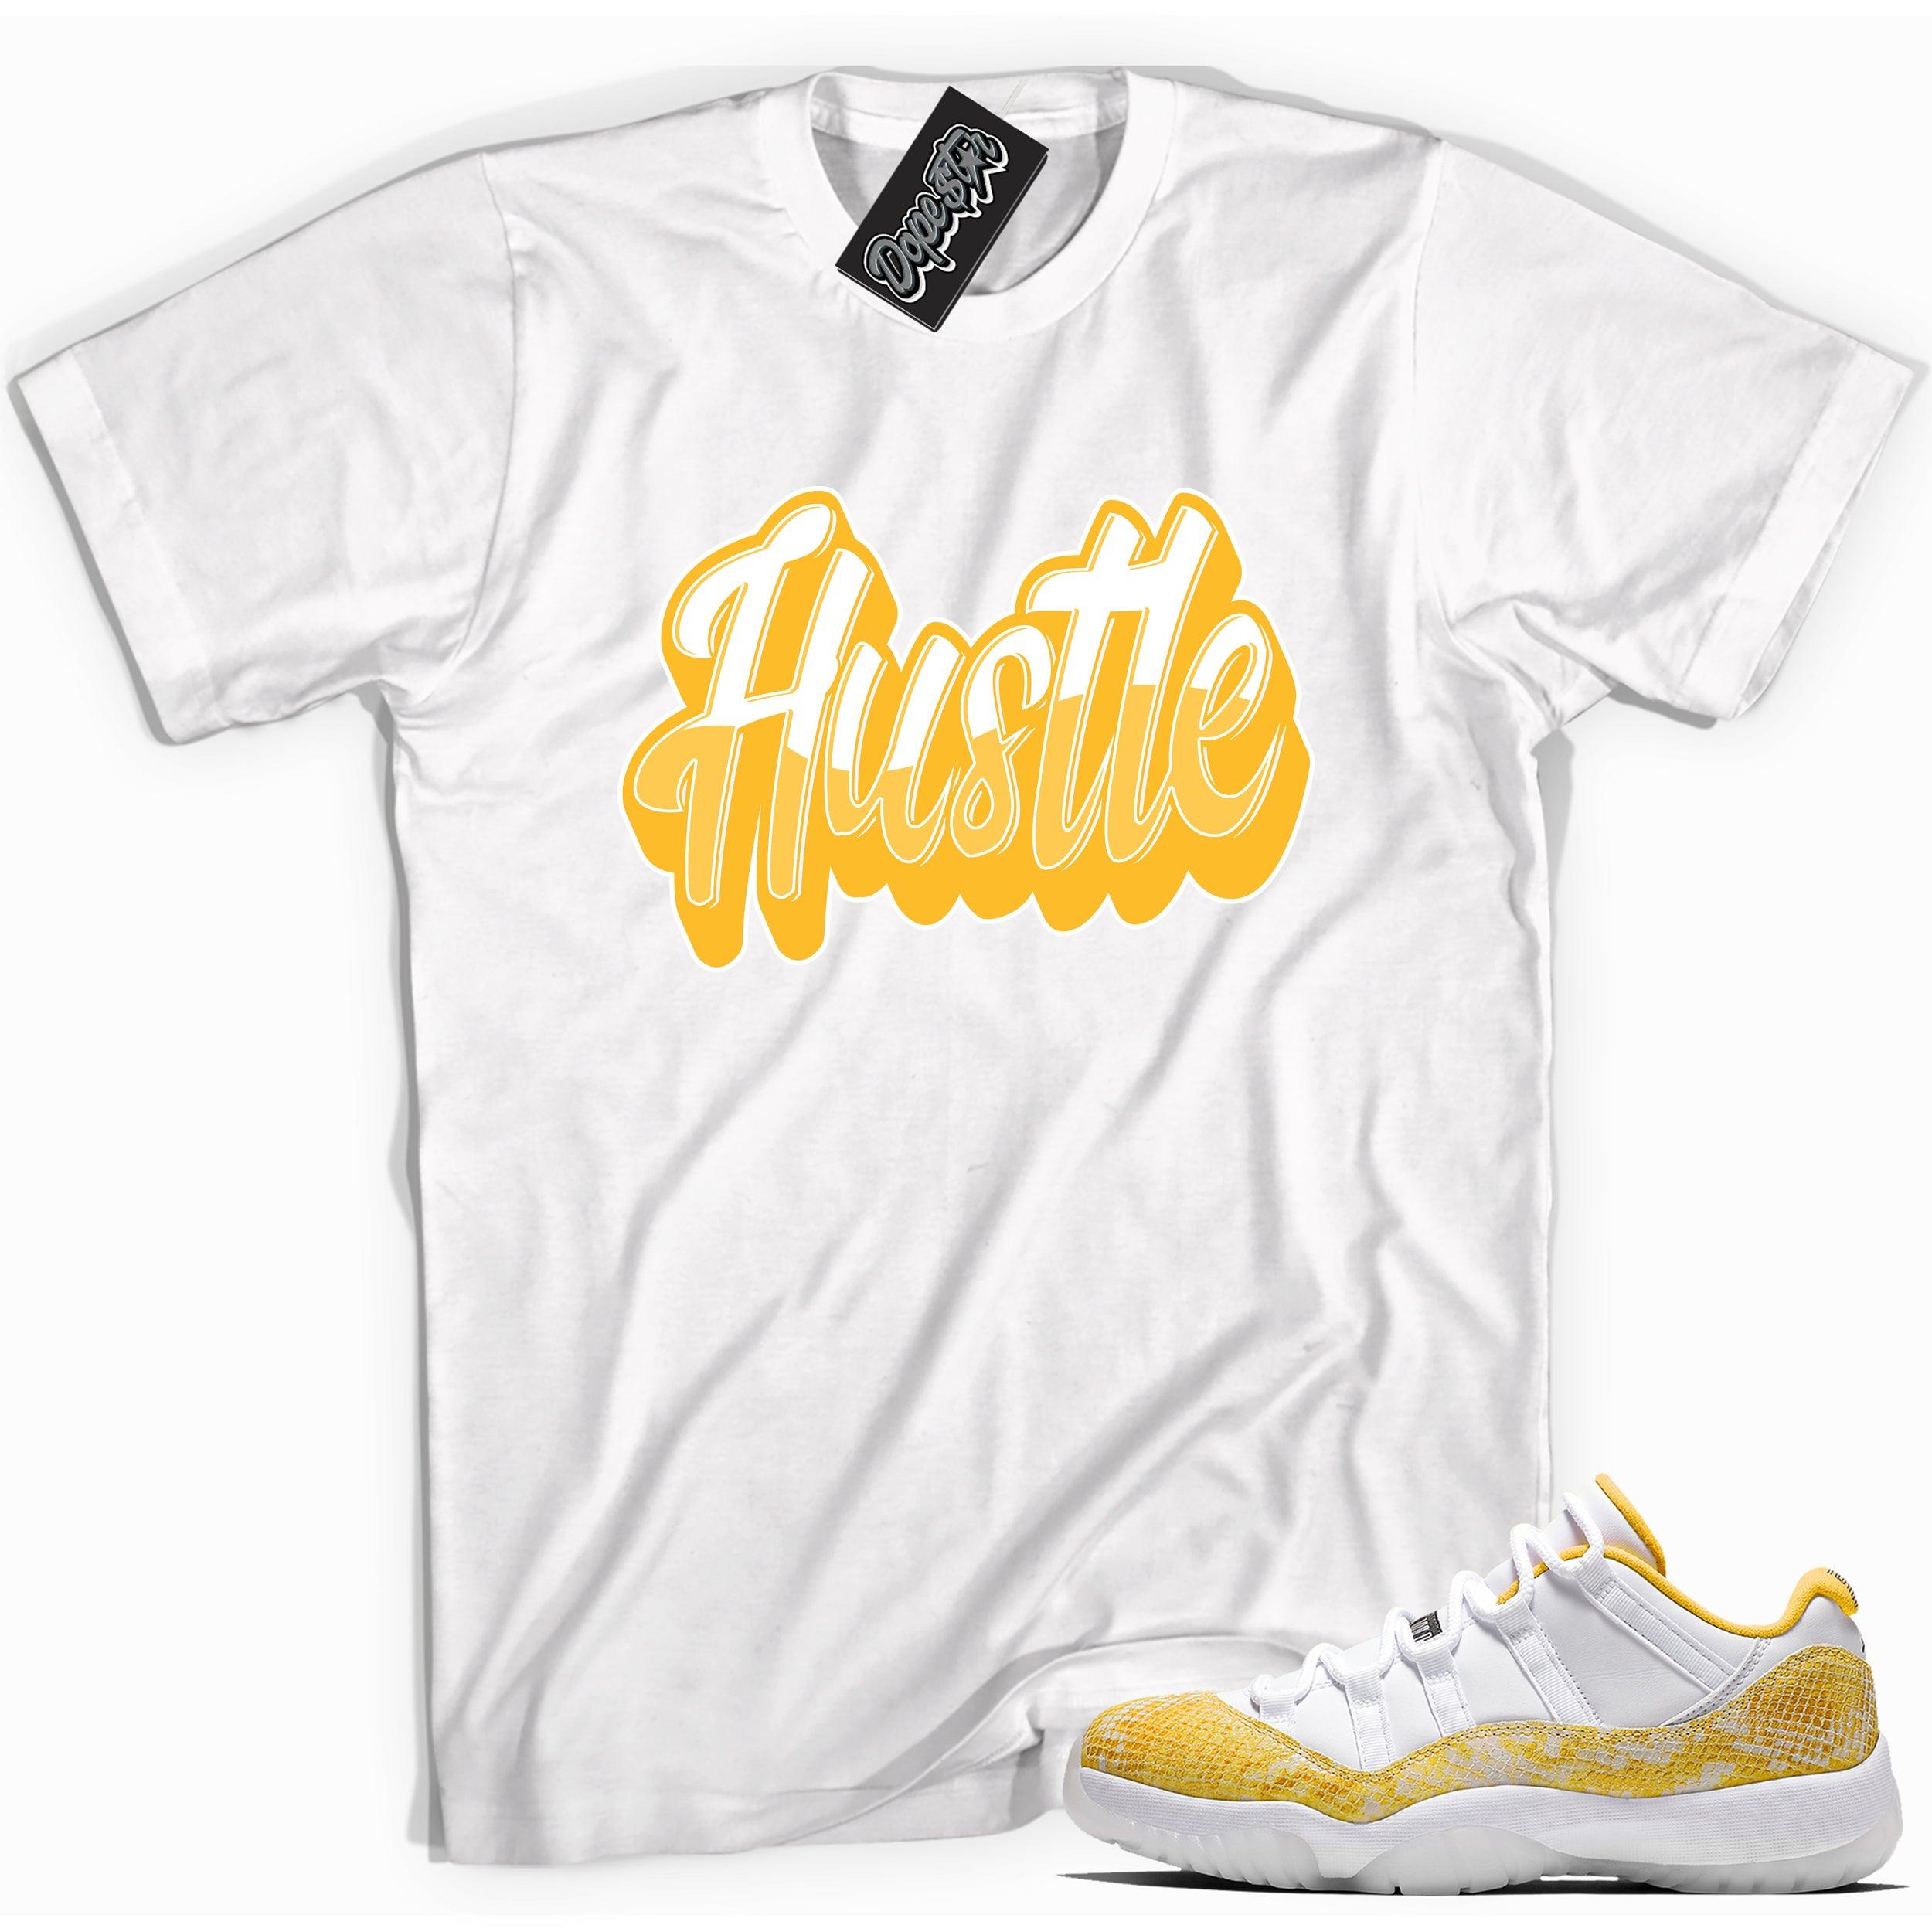 Cool white graphic tee with 'hustle' print, that perfectly matches Air Jordan 11 Low Yellow Snakeskin sneakers